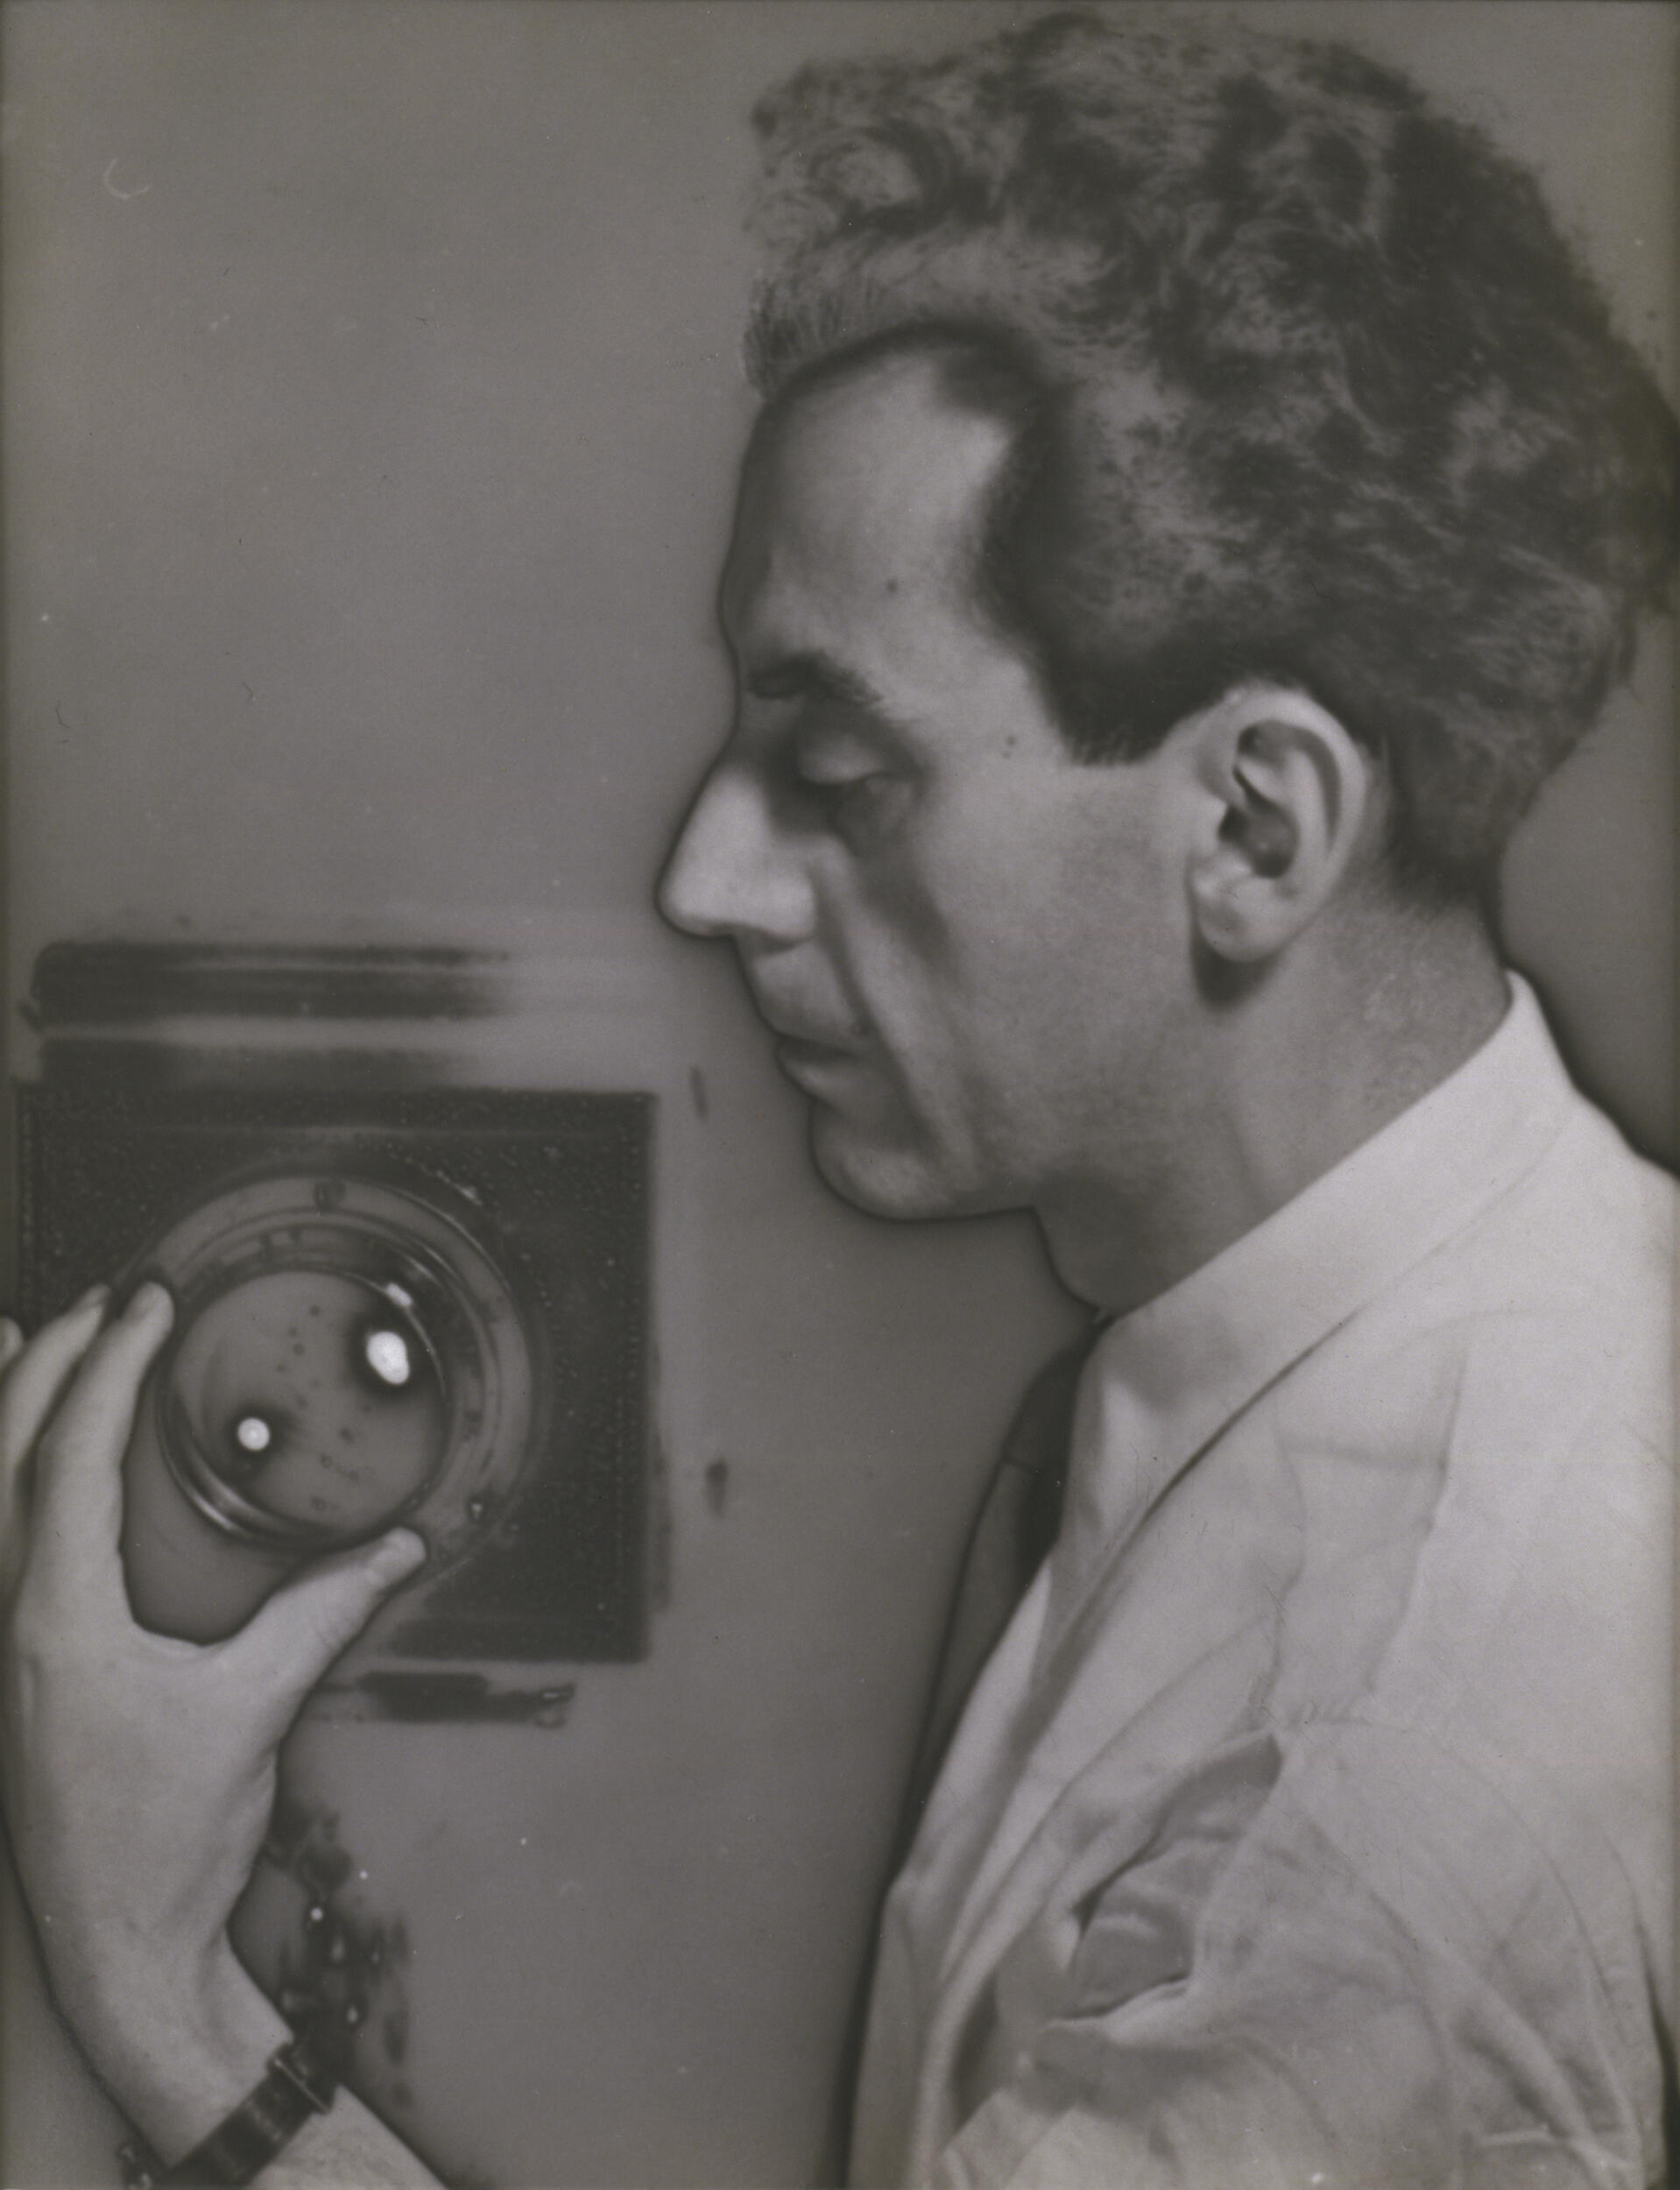 Man Ray, Self-Portrait with Camera, 1930